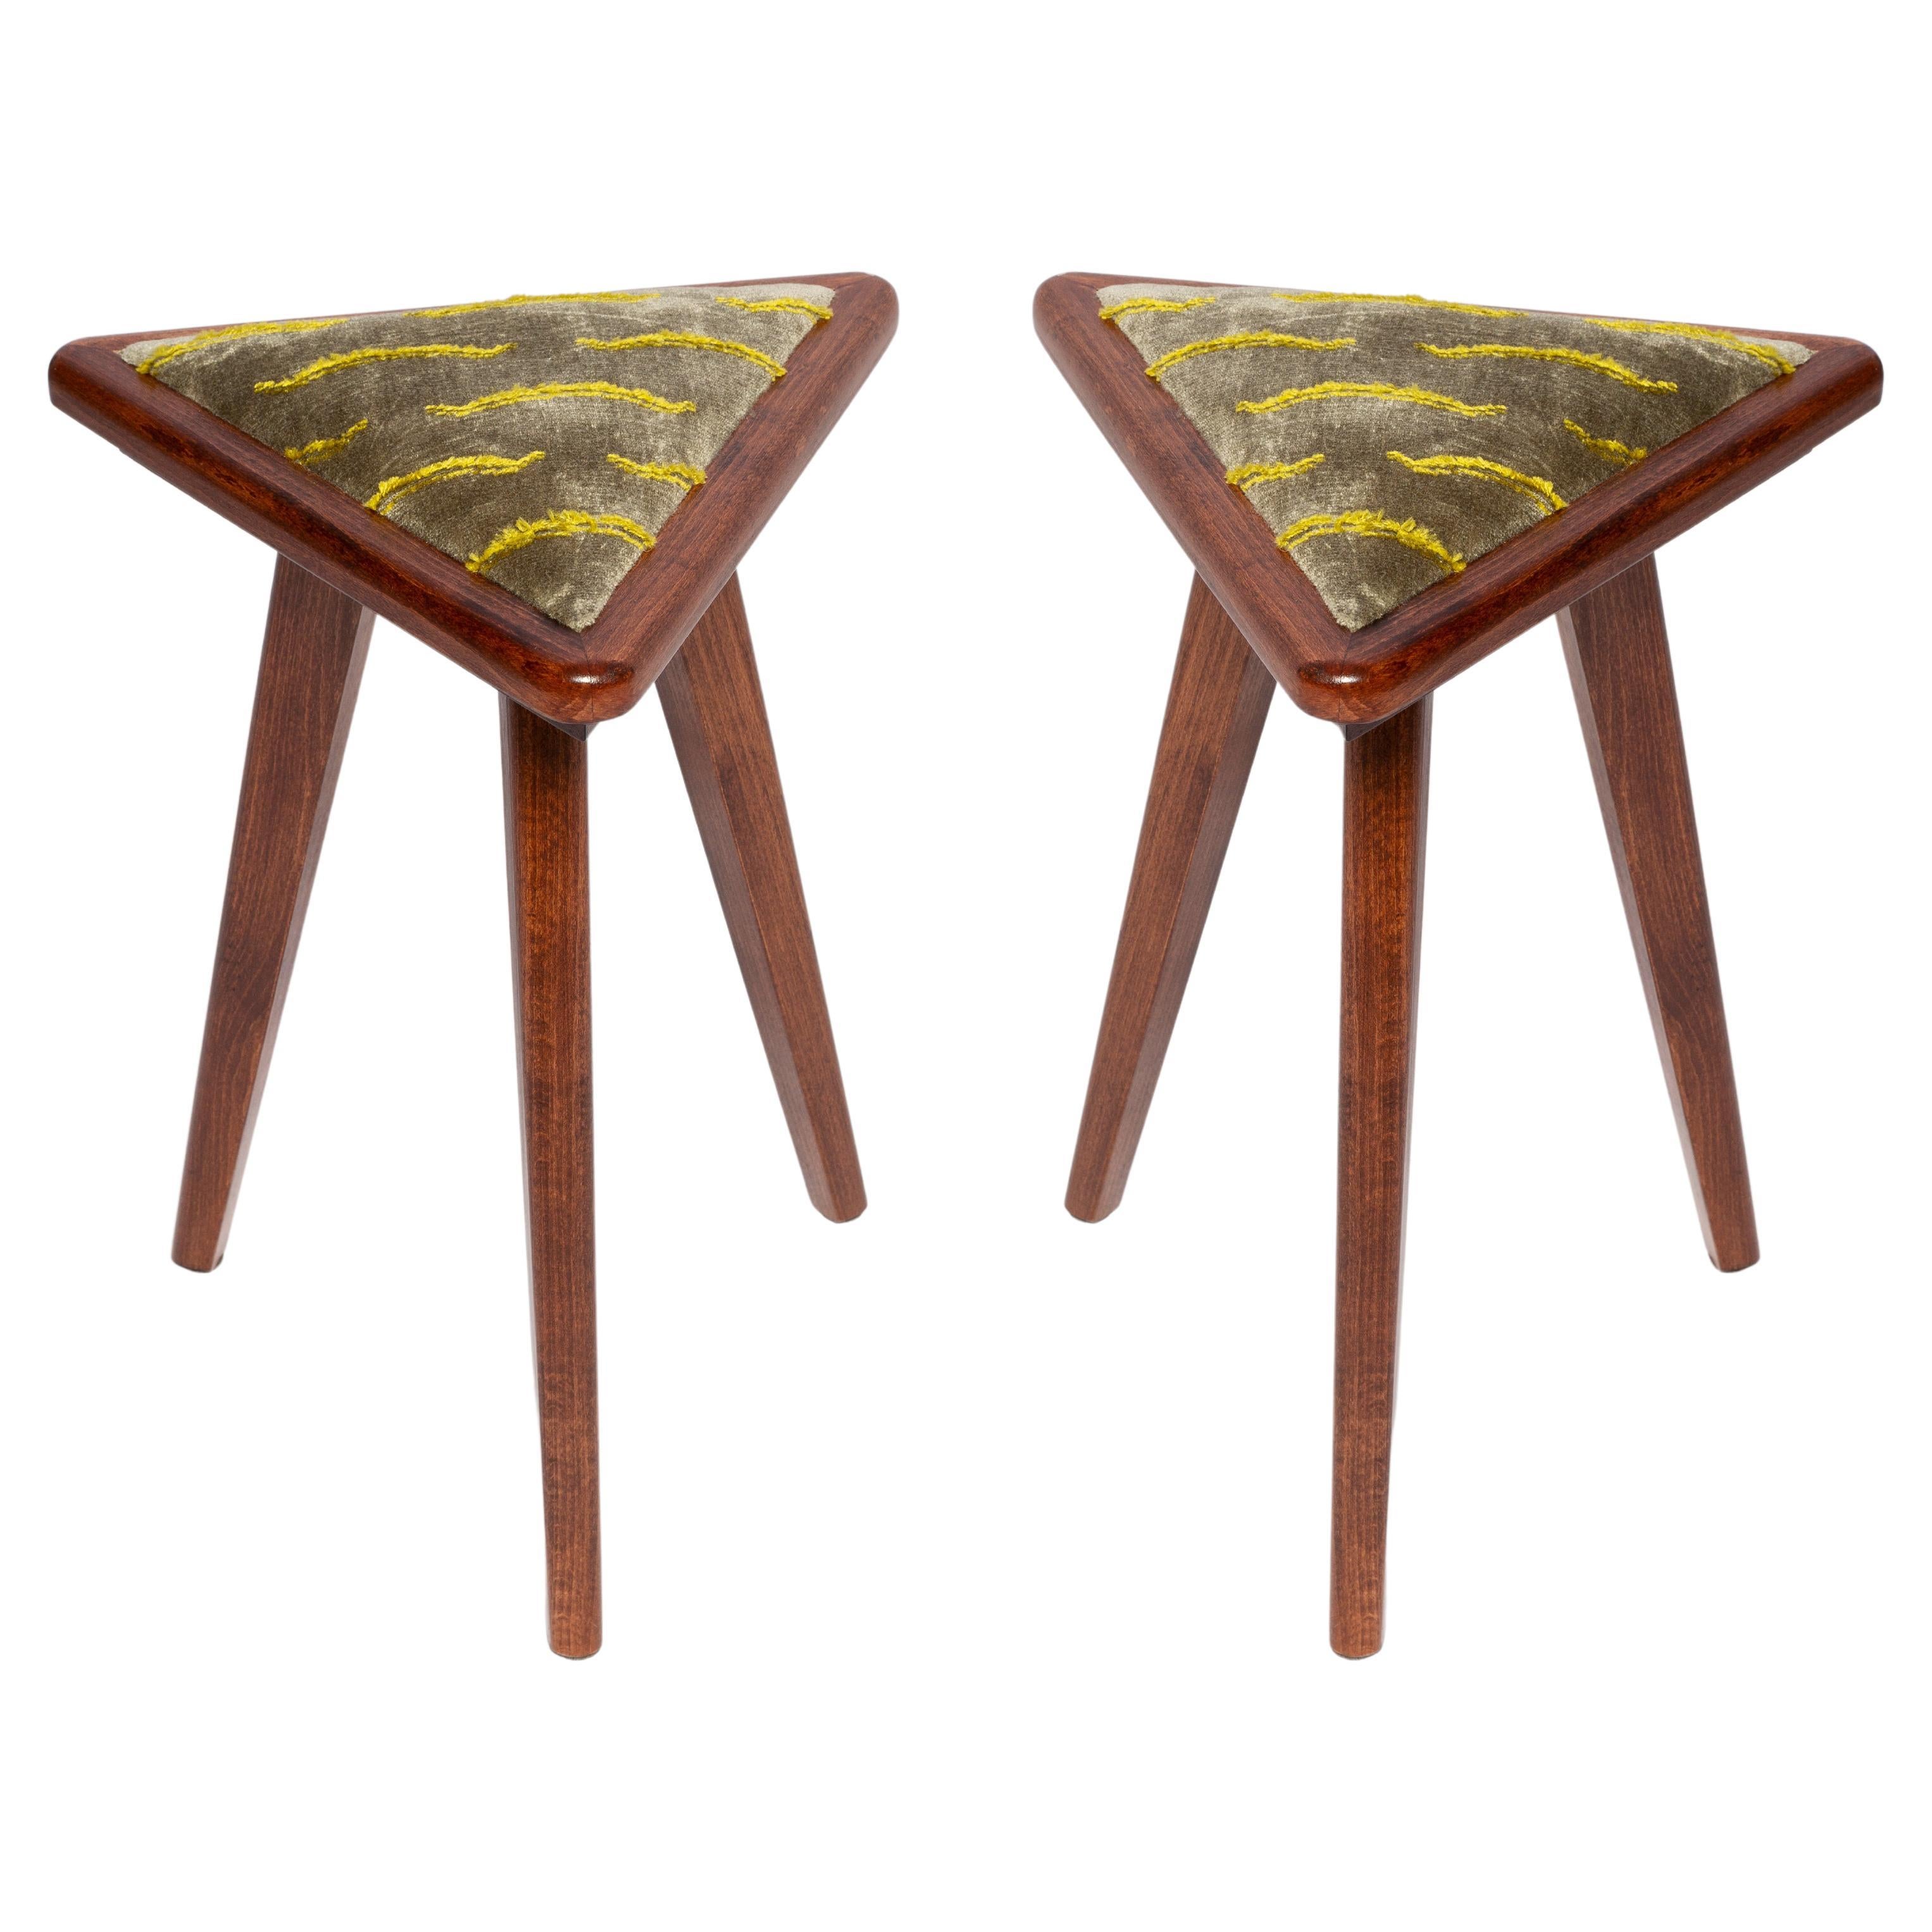 Set of 2 Mid-Century Style Triangle Stools in Nouvelles Vagues, Vintola, Europe